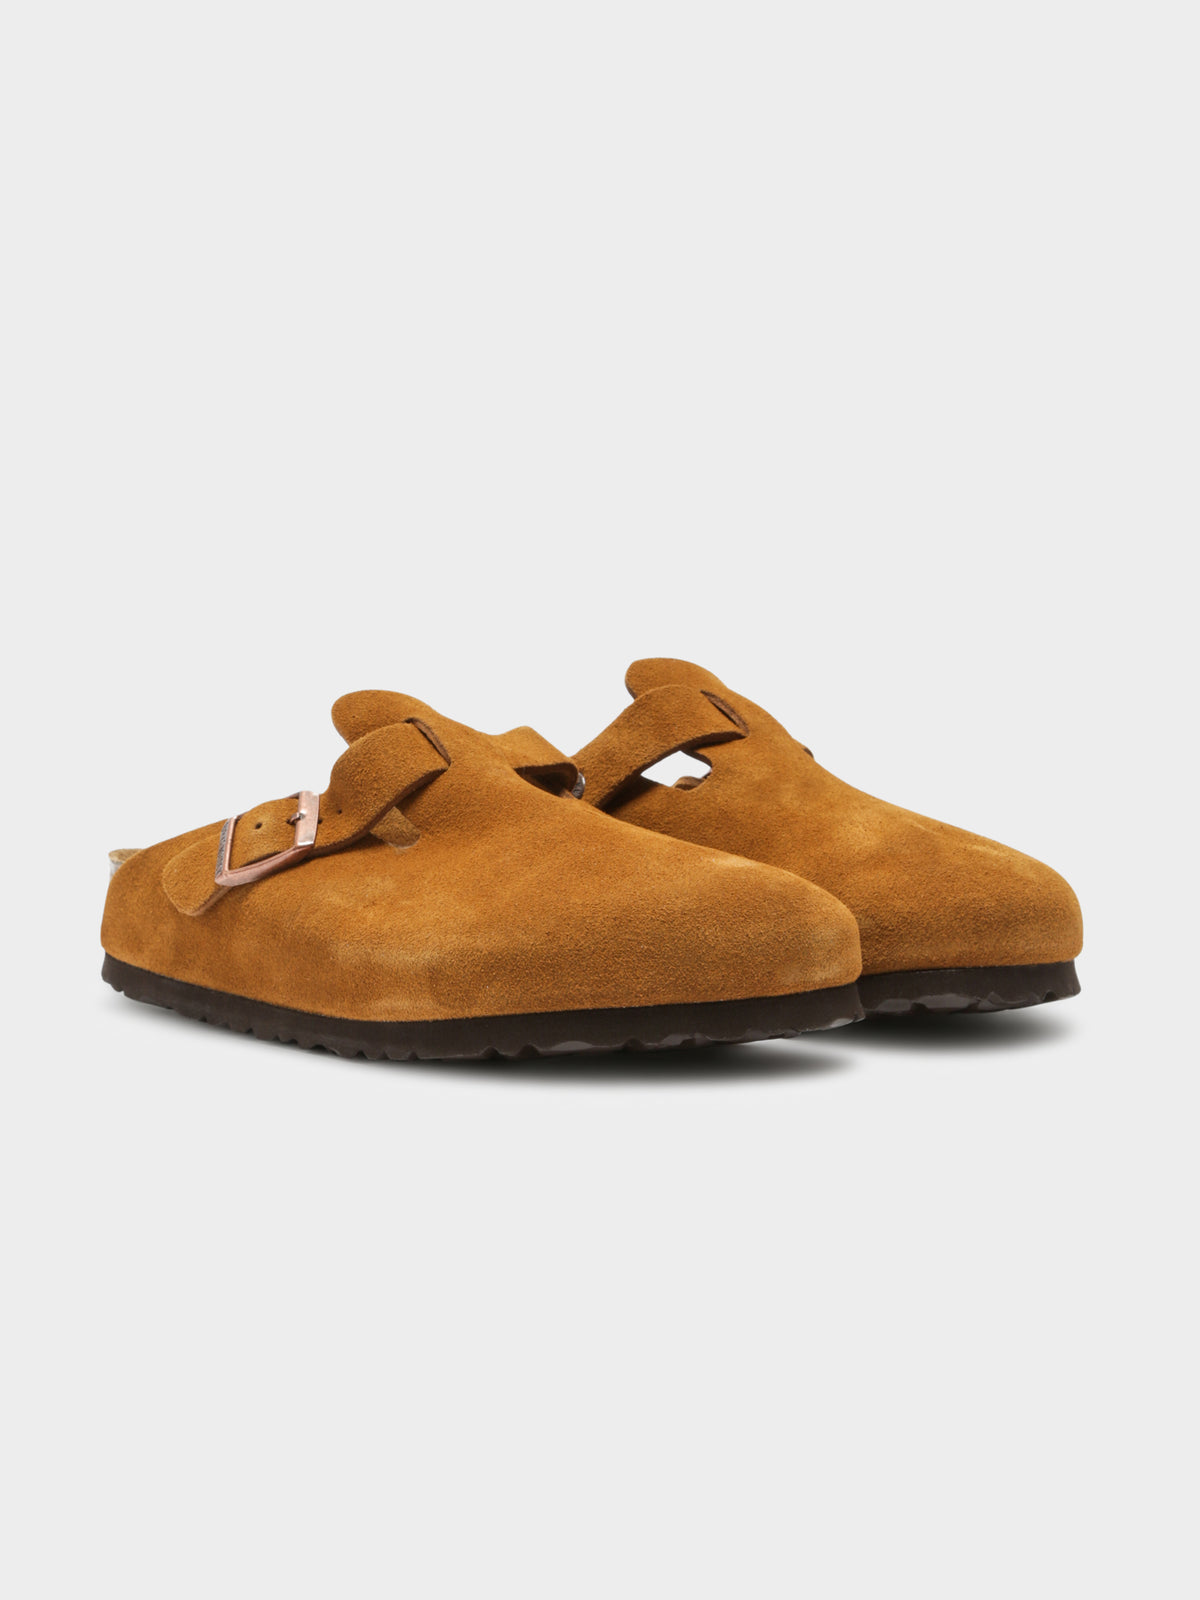 Unisex Boston Soft Footbed Slip-Ons in Mink Suede Leather